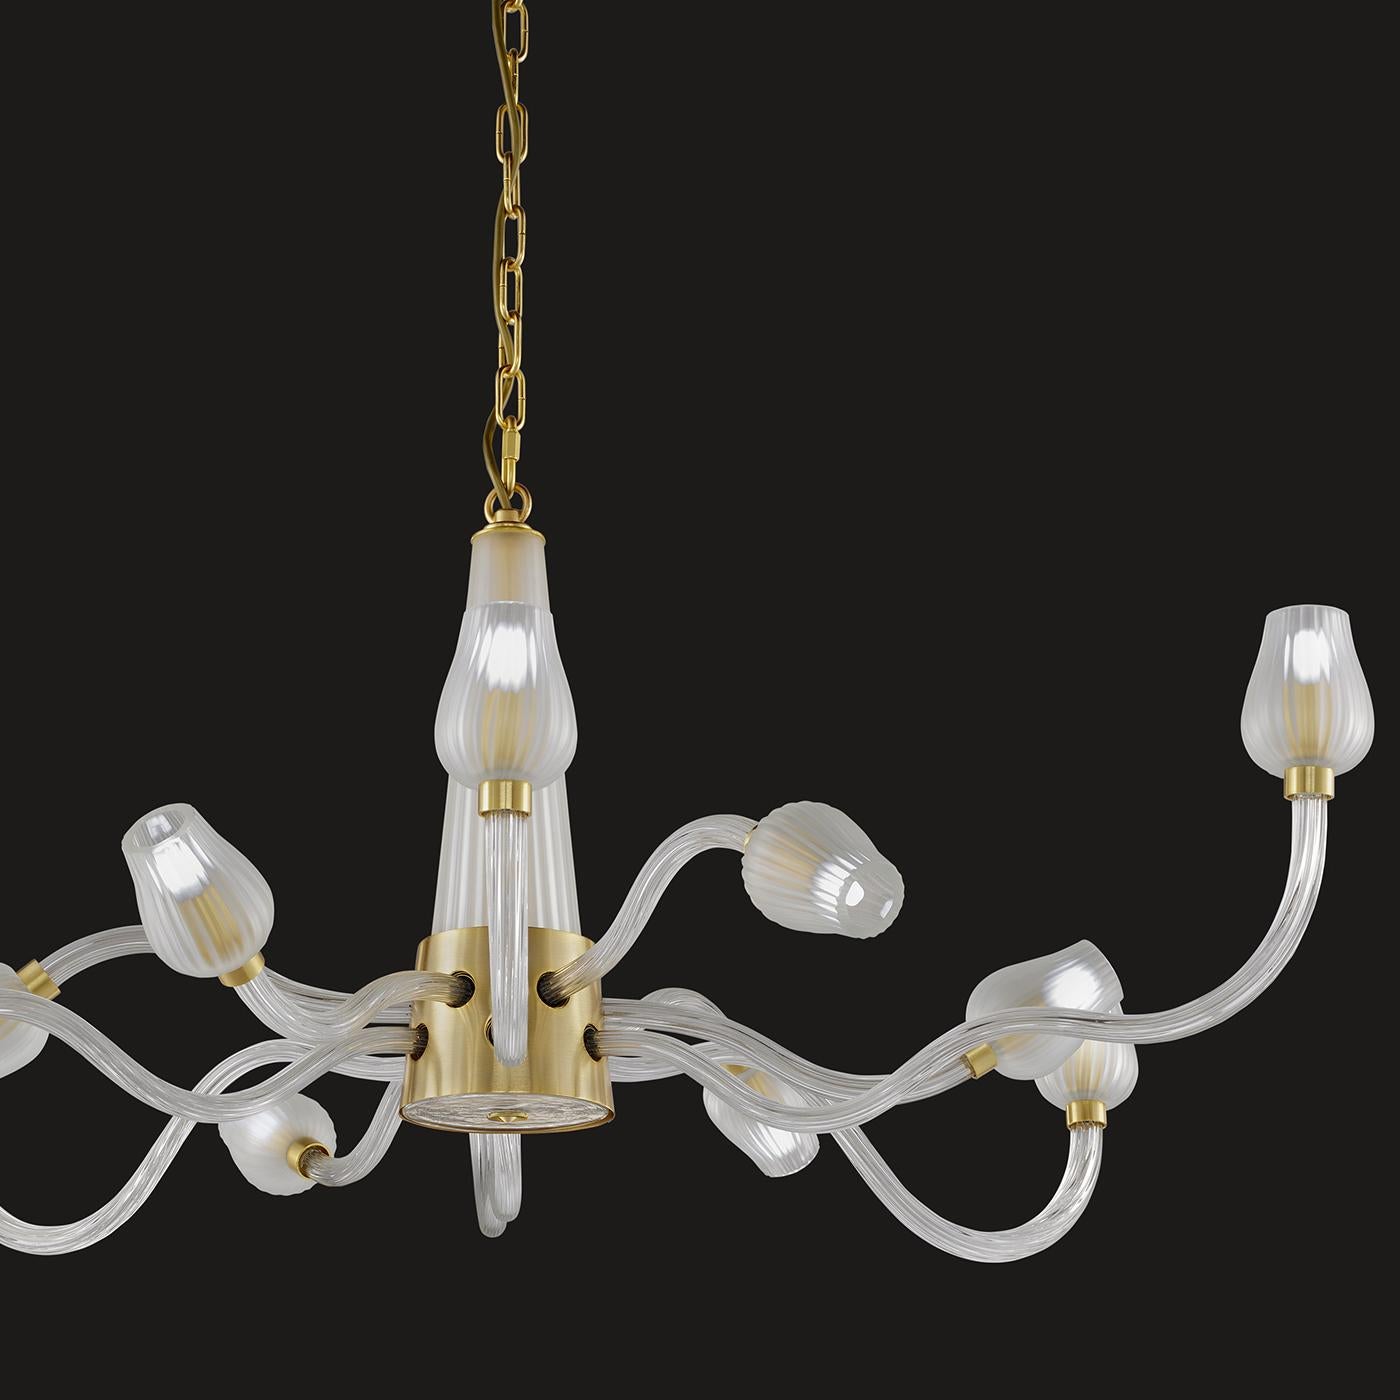 Euroluce is a story of passion for the Italian manufacturing sector, right since the start, when they were just a small but dynamic and innovative company working in the lighting sector and making light fittings. A chandelier with a black nichel and